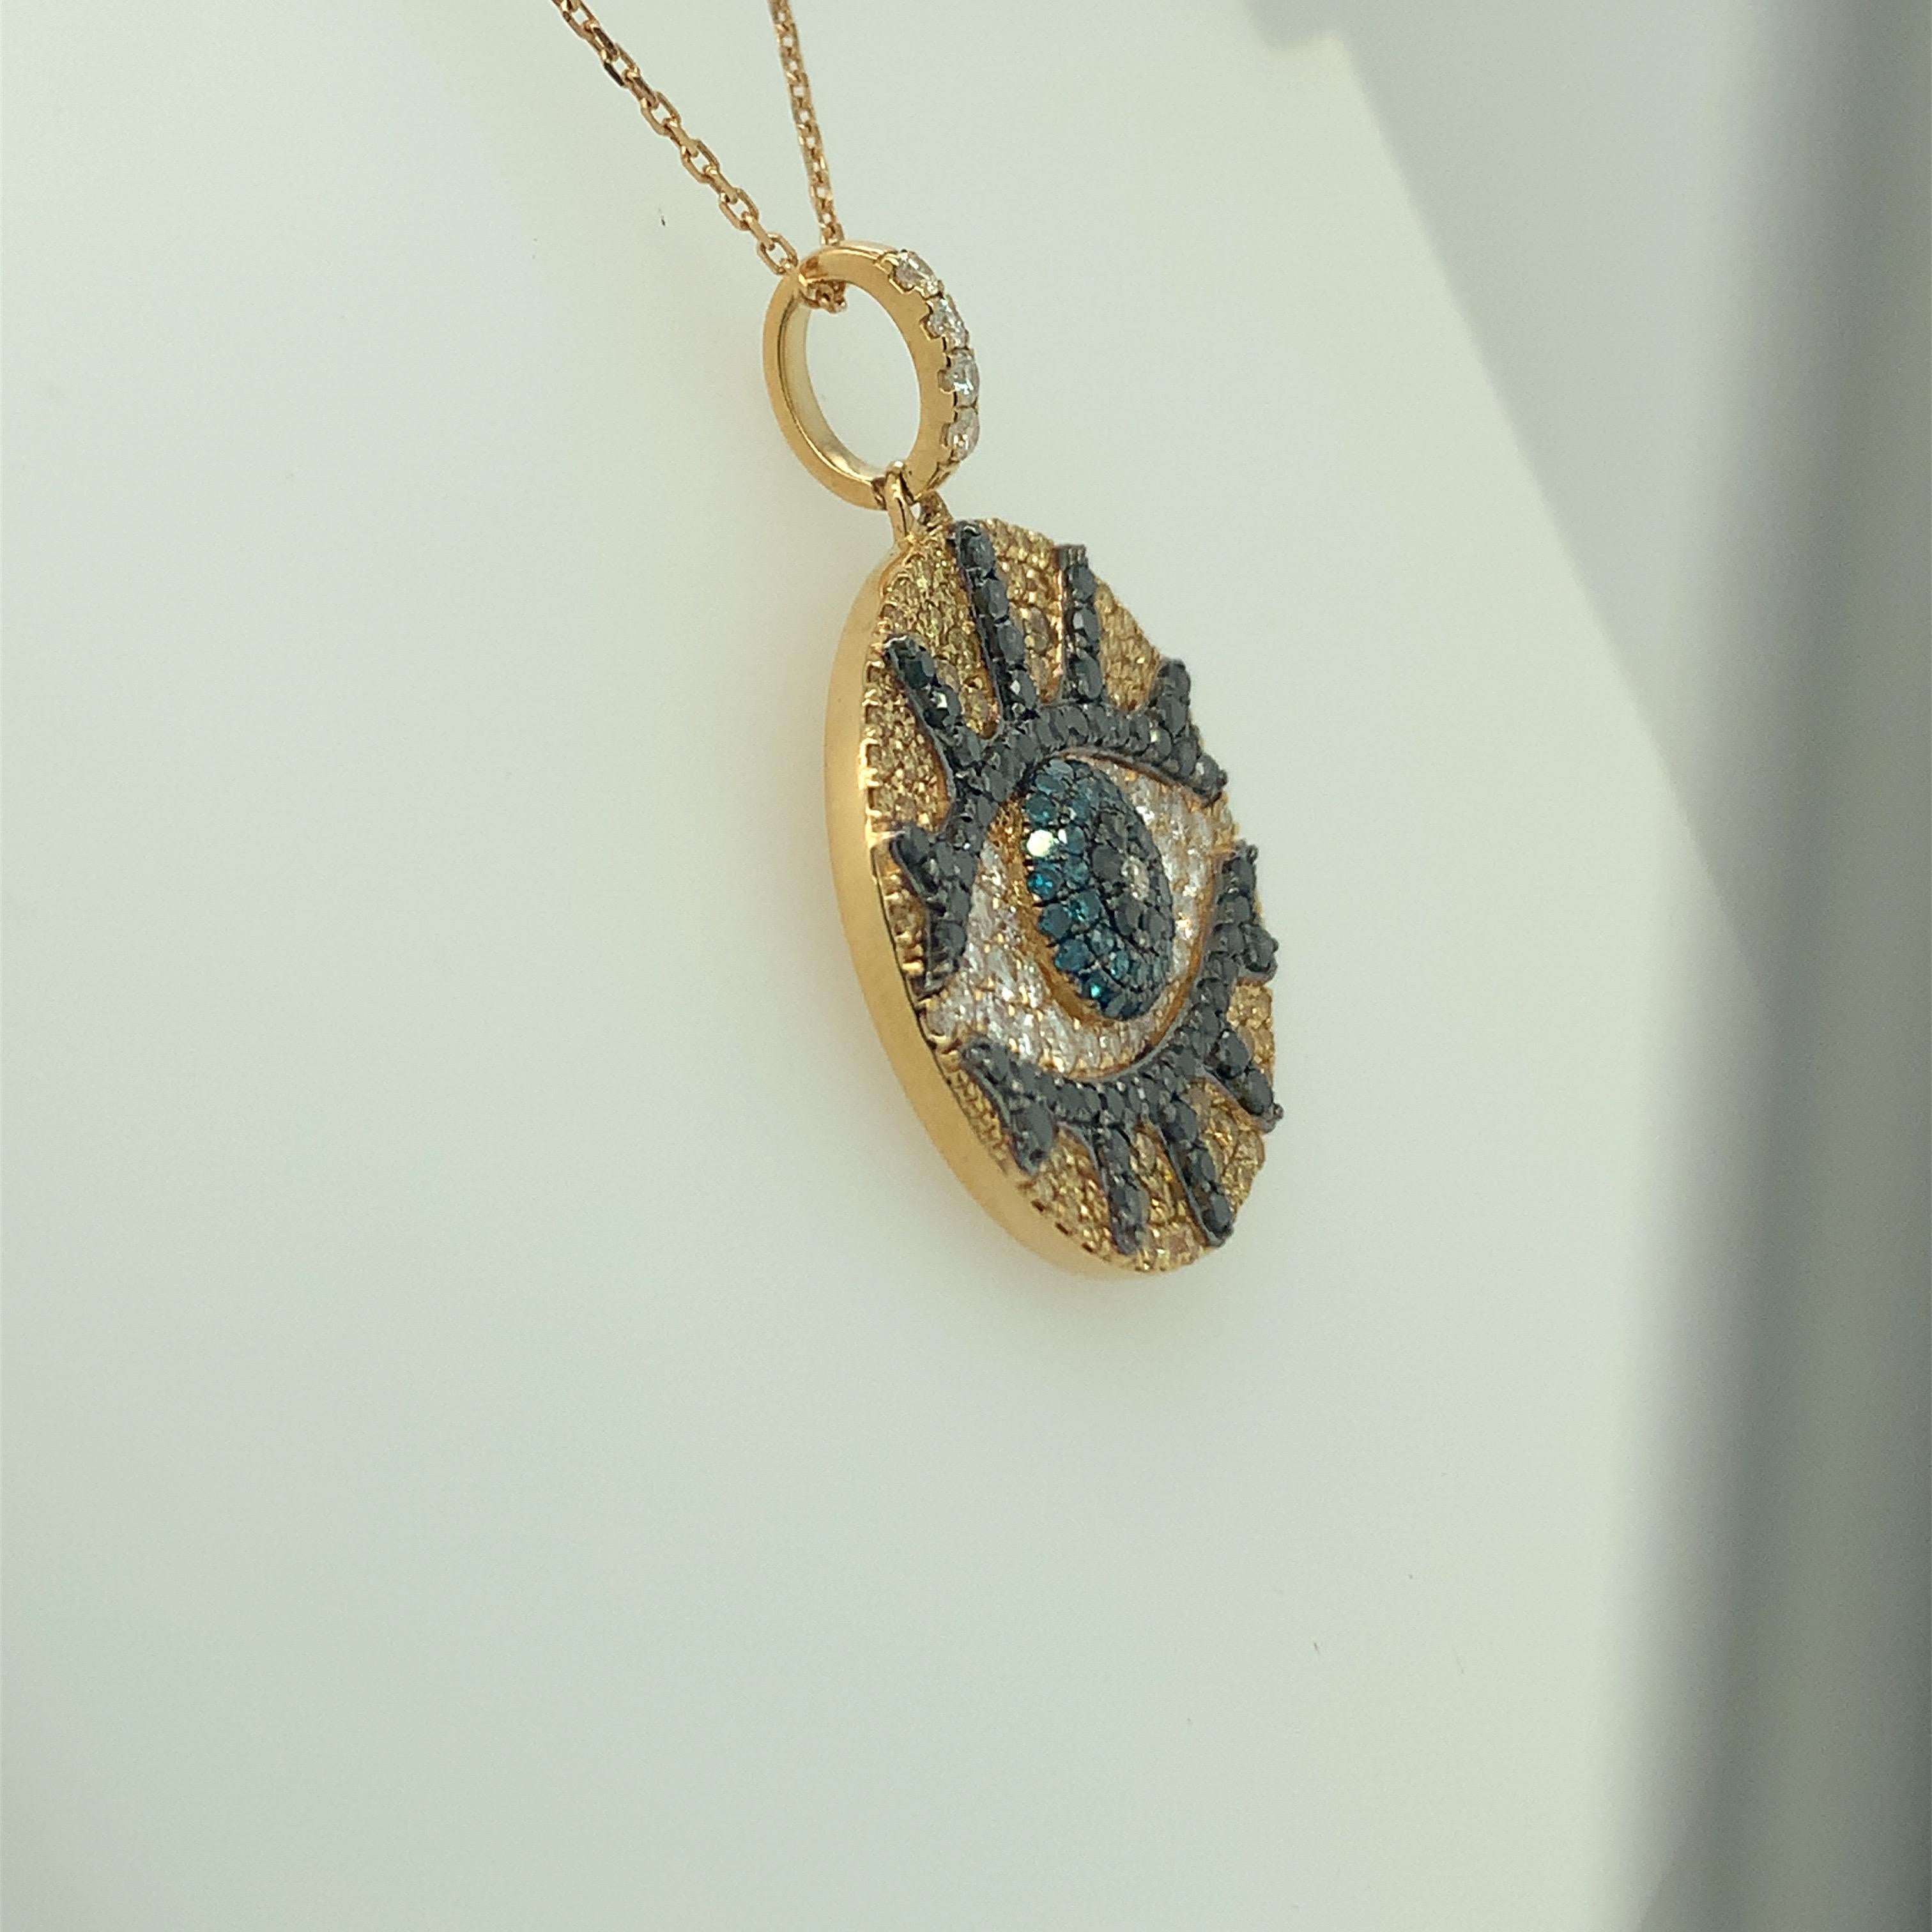 Beautiful yellow white and blue diamonds is natural earth mined diamonds set on 18K yellow gold is one of a kind Pendant with chain. Total diamonds weight is 2.11 carat.Total number. of diamonds is 193  pieces.

it is said 40% of the. world